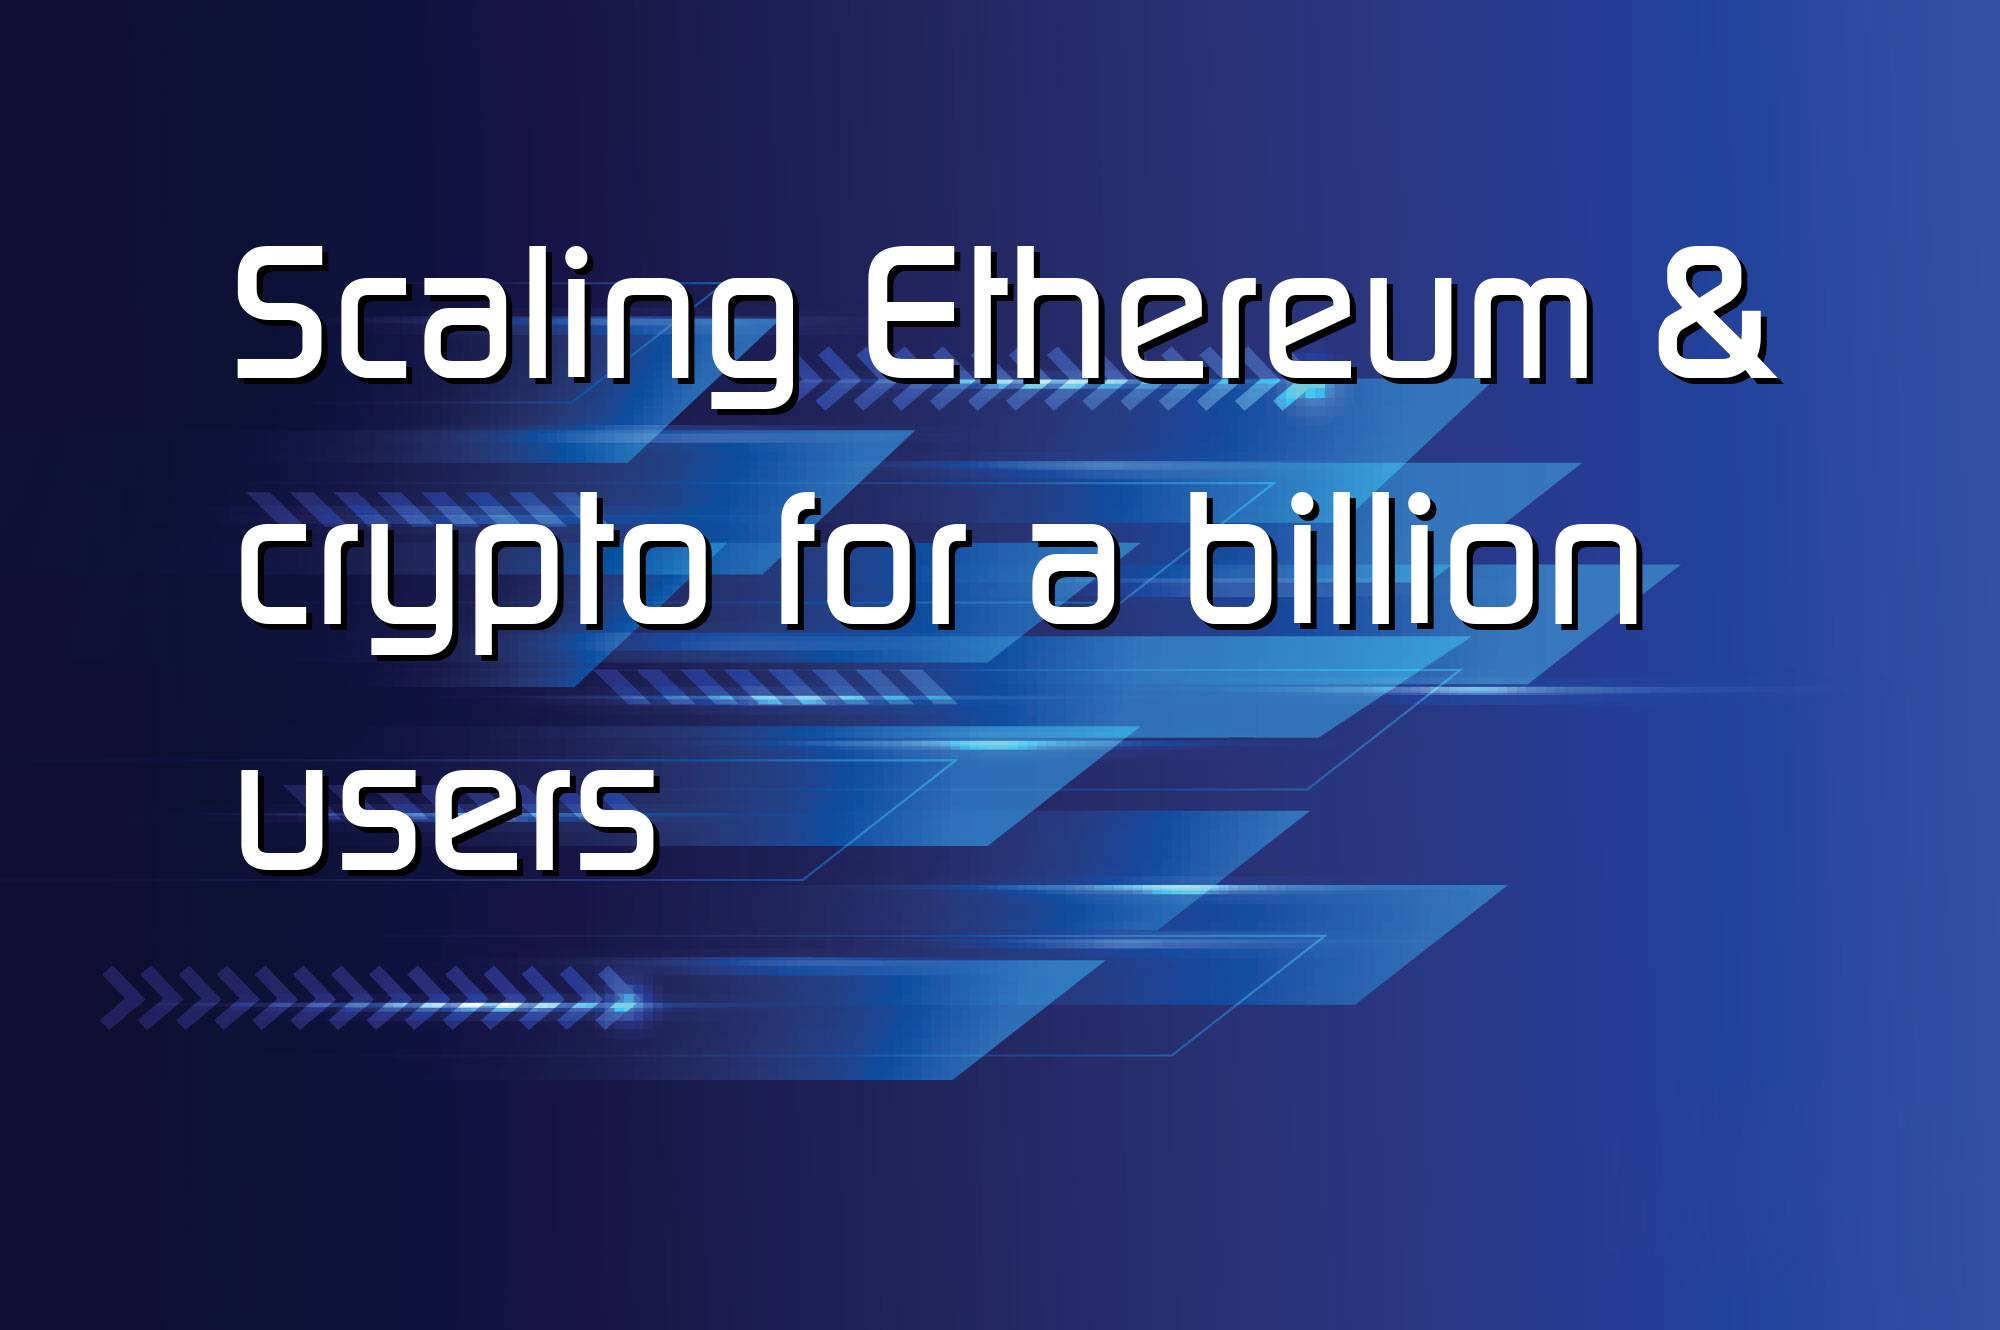 @$57599: Scaling Ethereum & crypto for a billion users